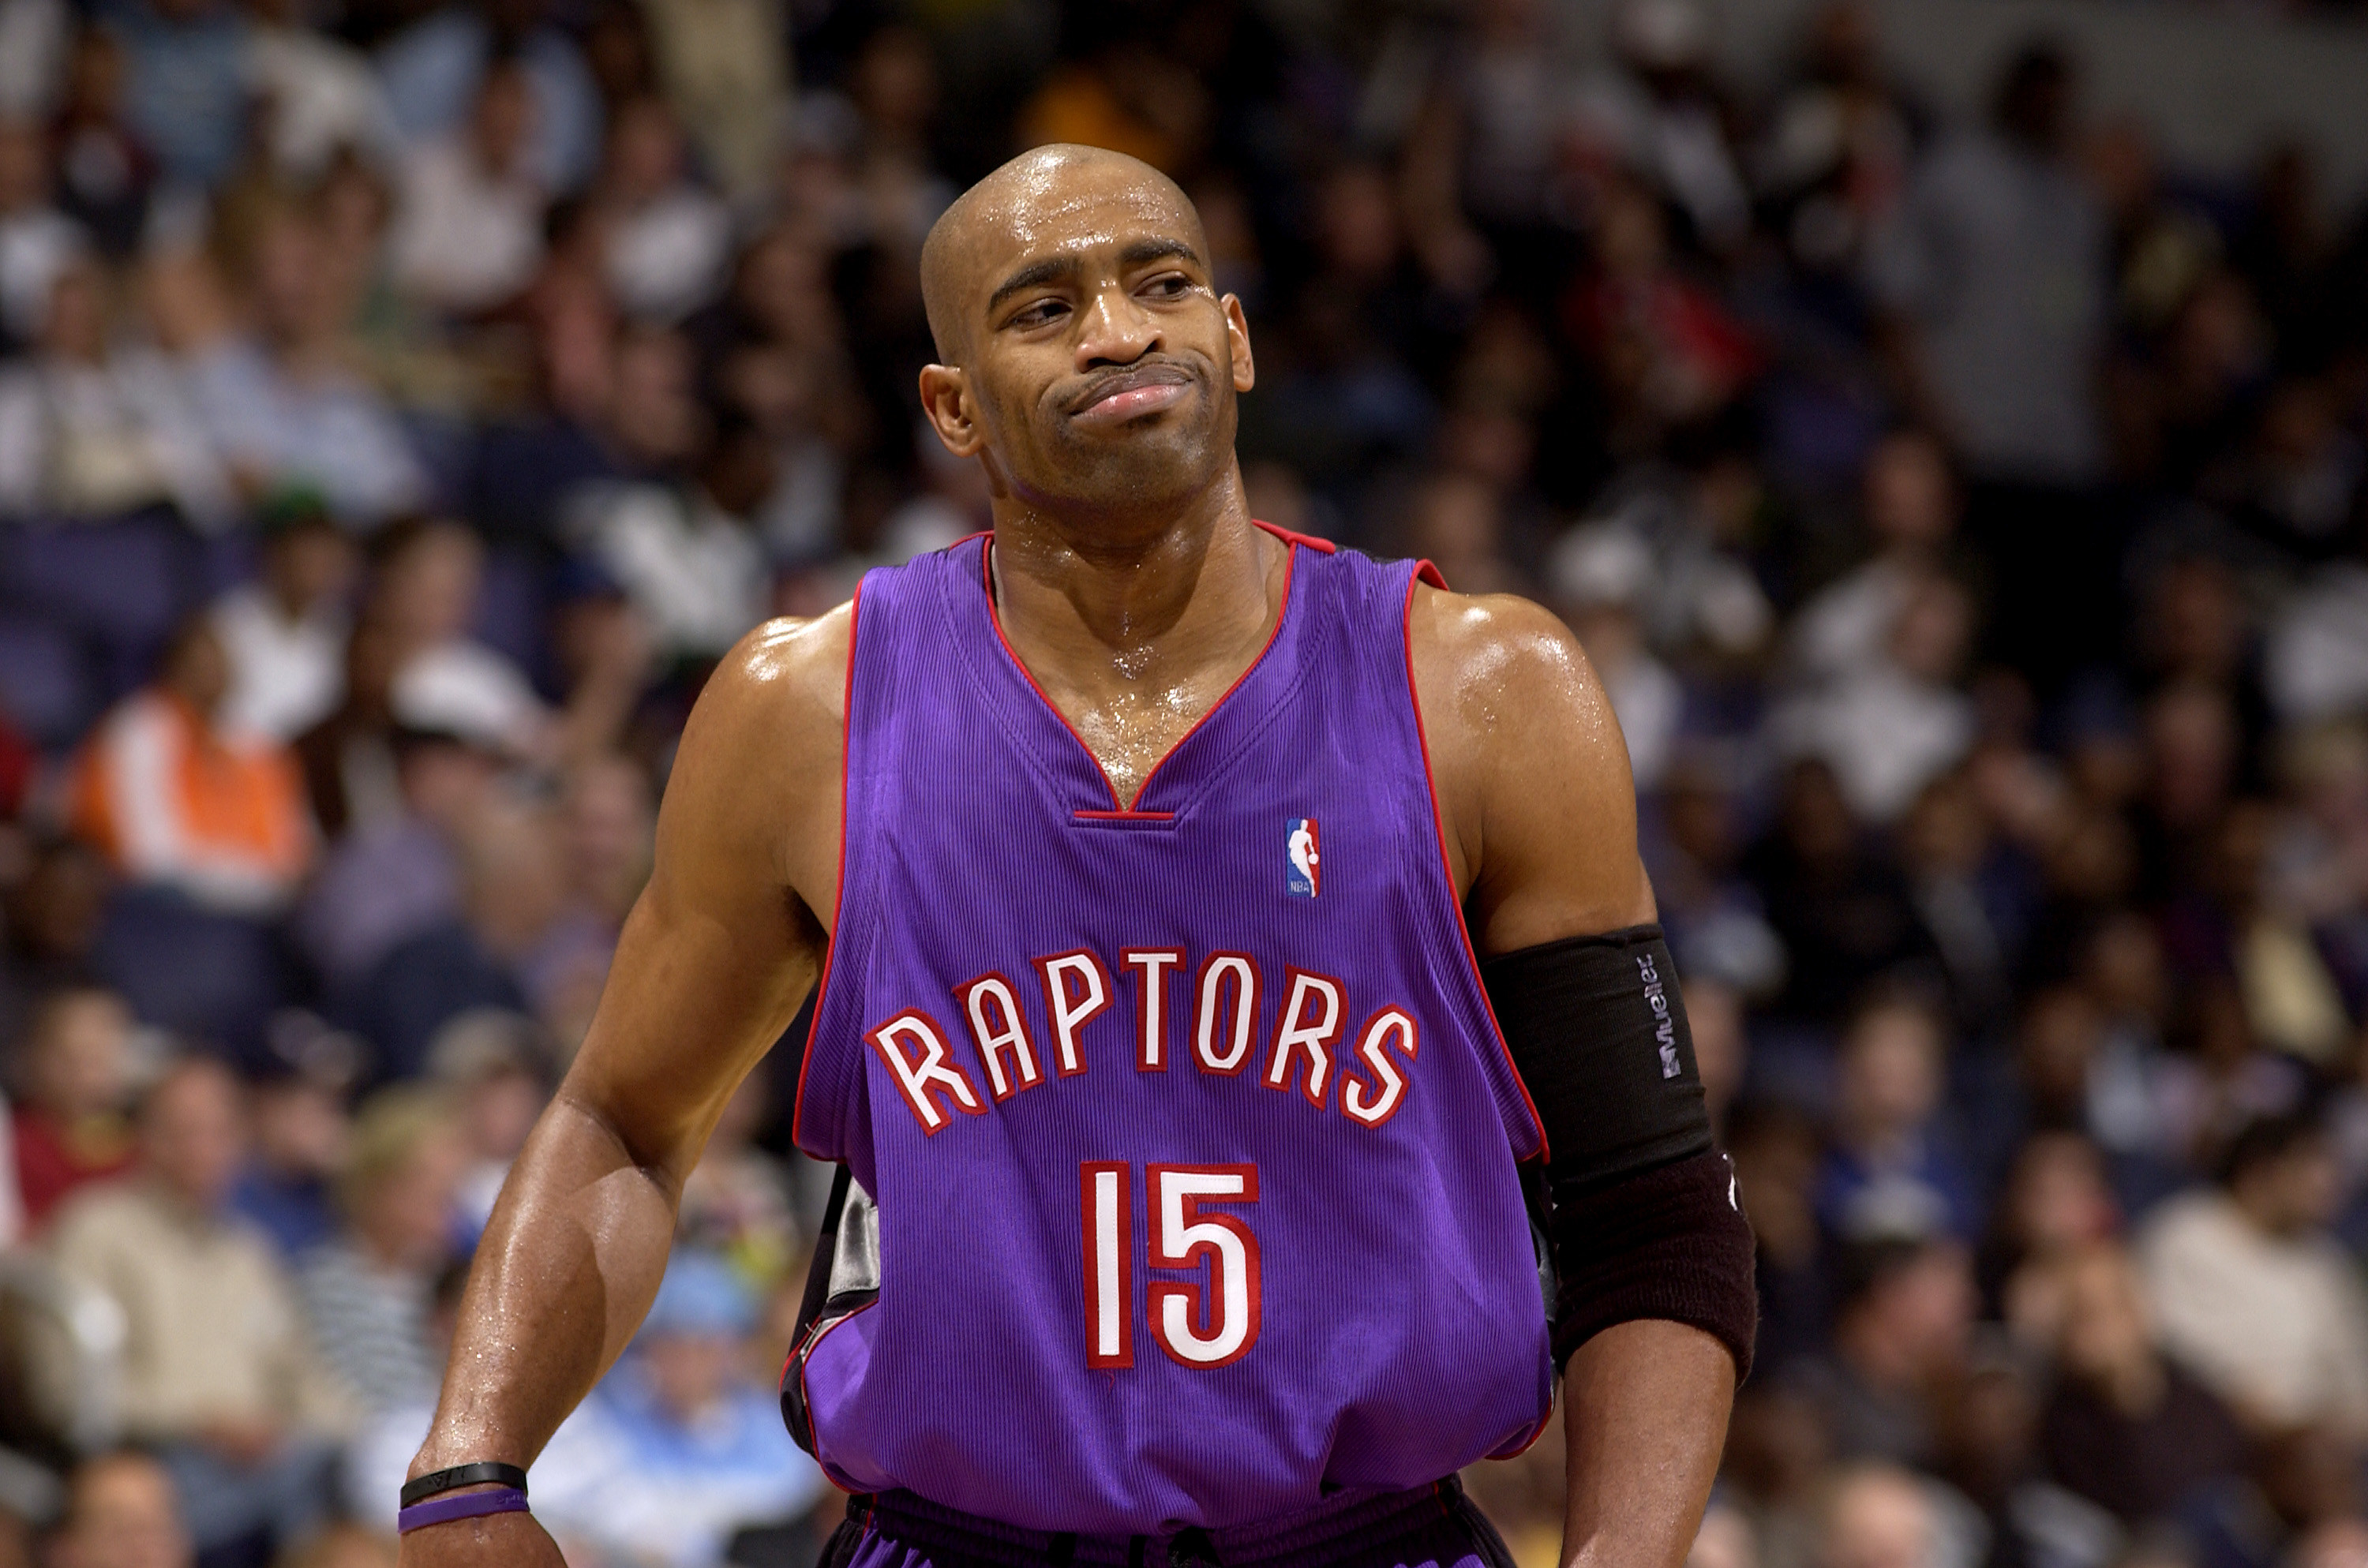 Purple Raptors jersey with red outlining and white lettering